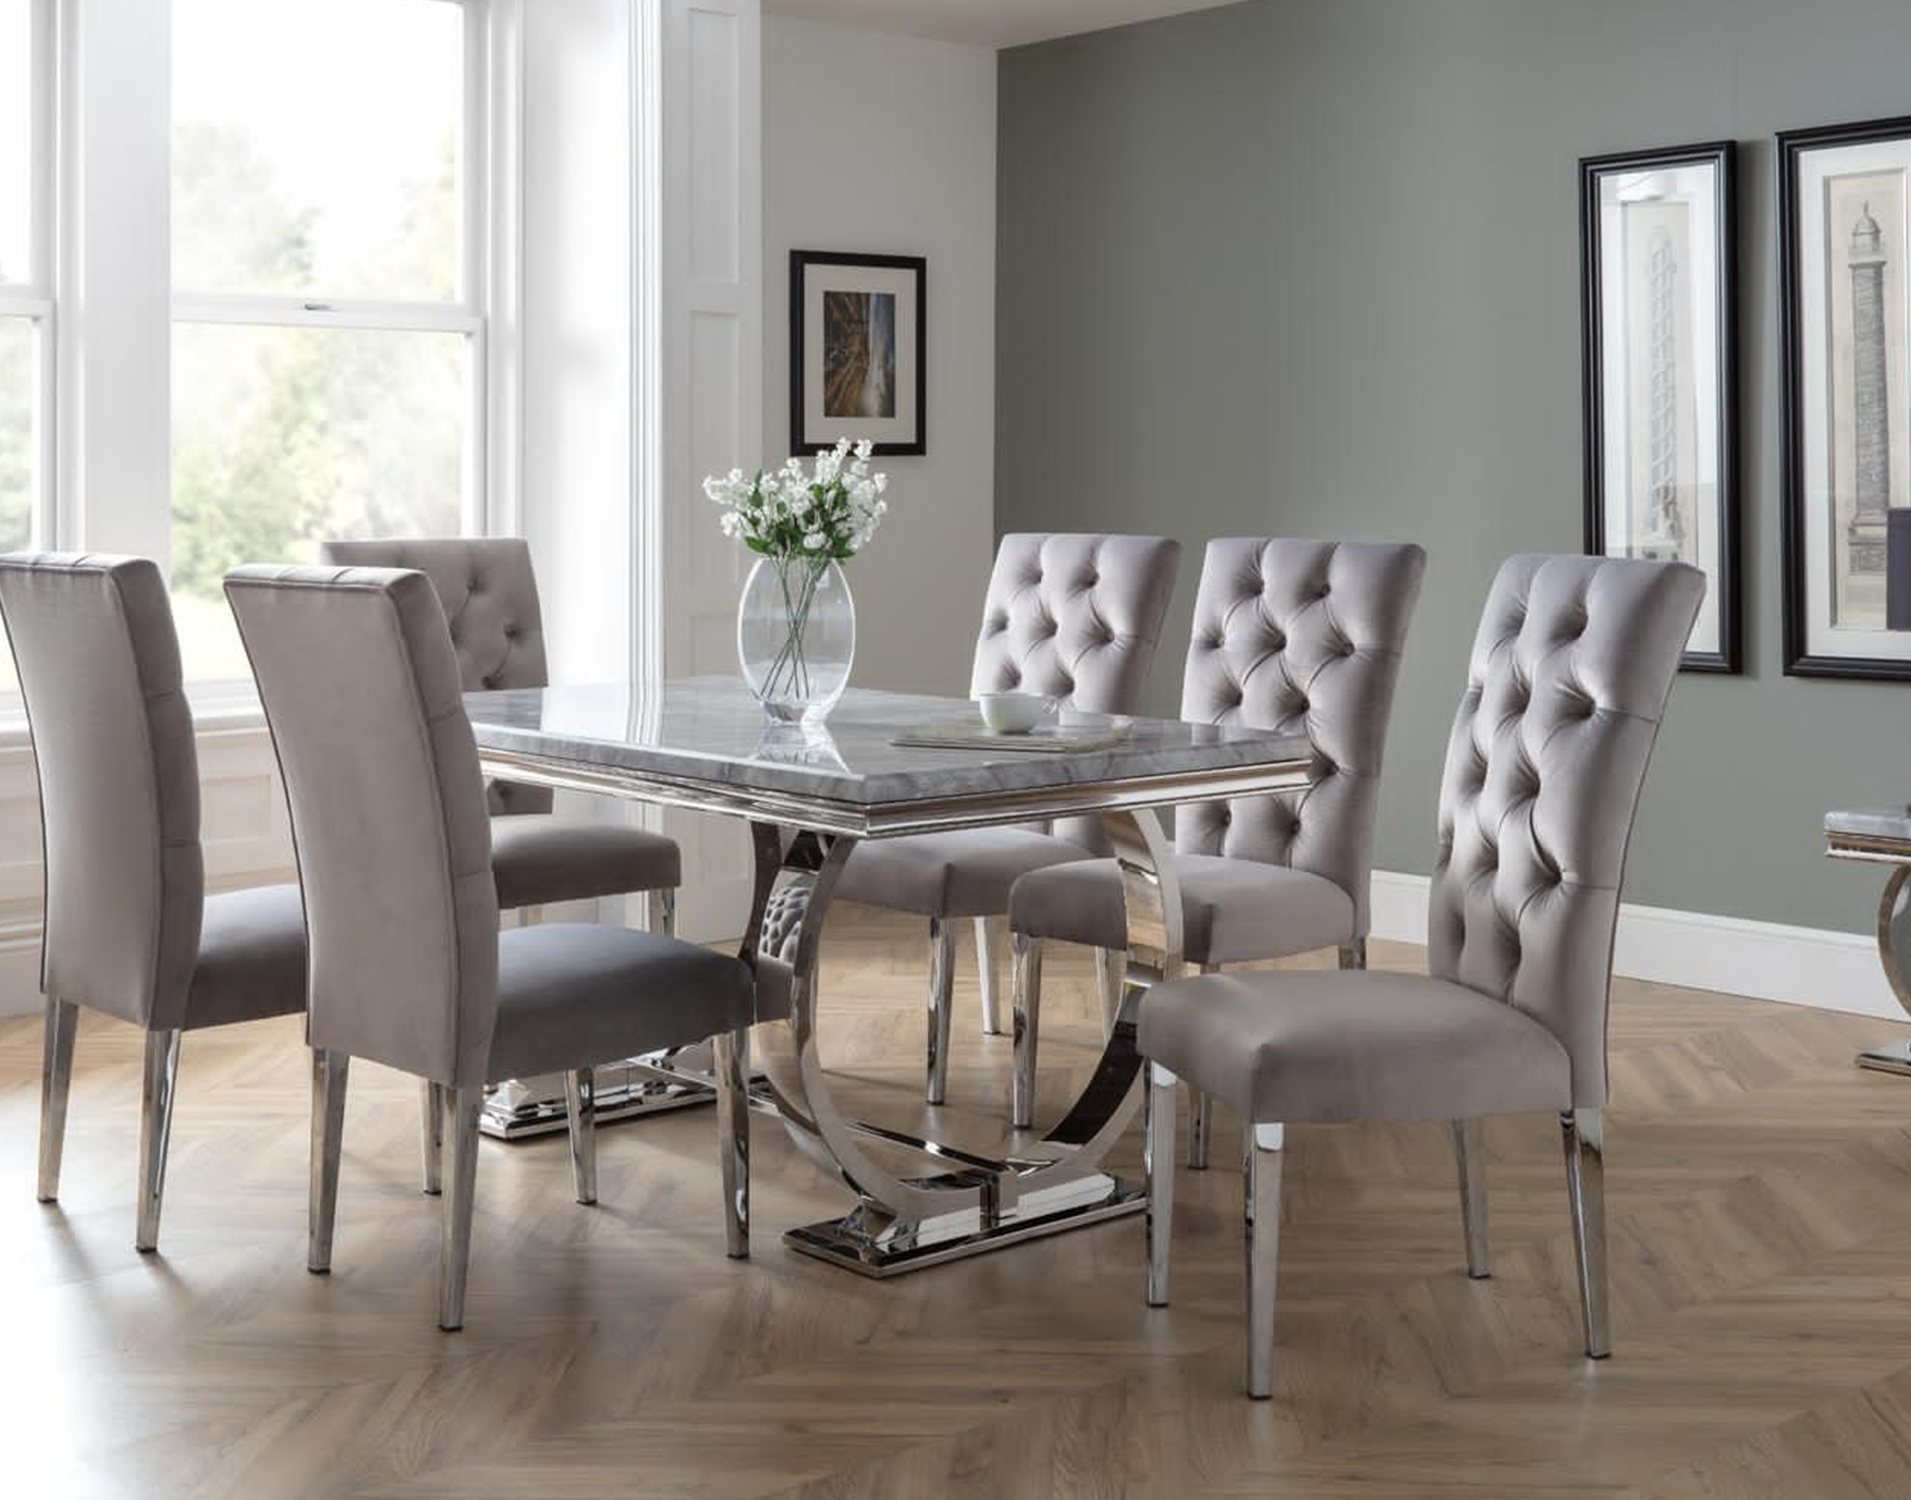 6 chair dining room set